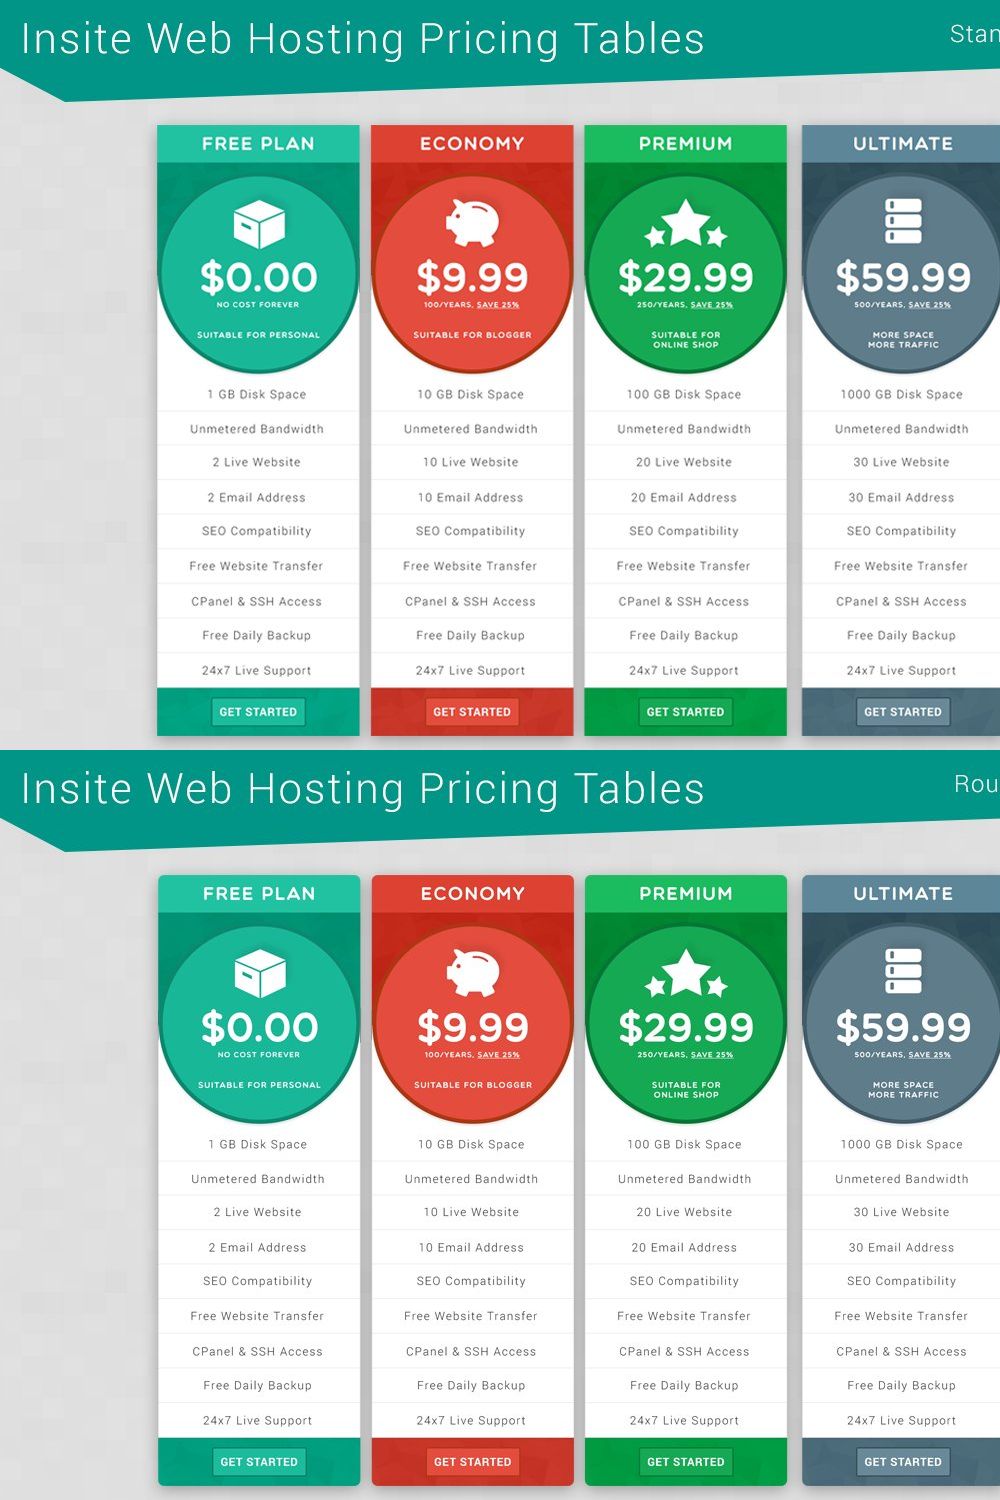 Insite Web Hosting Pricing Tables pinterest preview image.